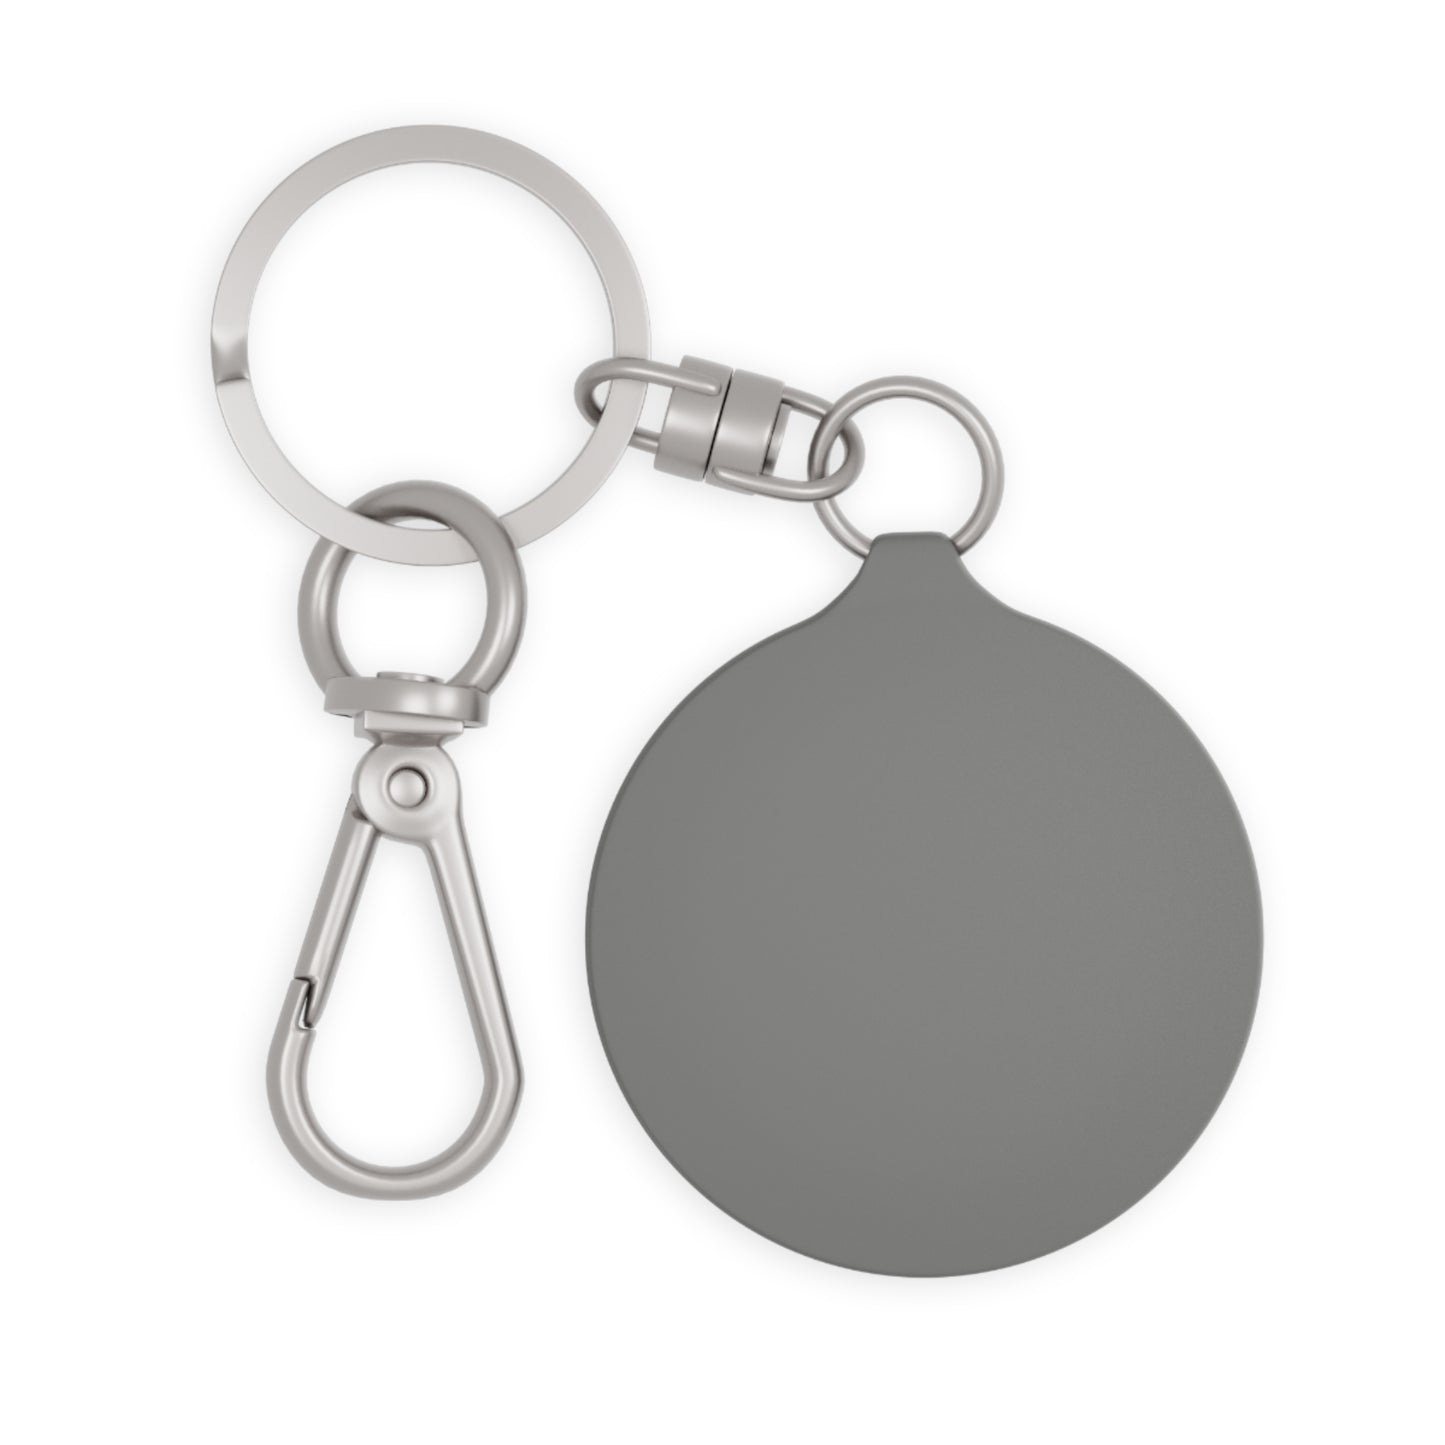 ALM Stand Together Key Ring